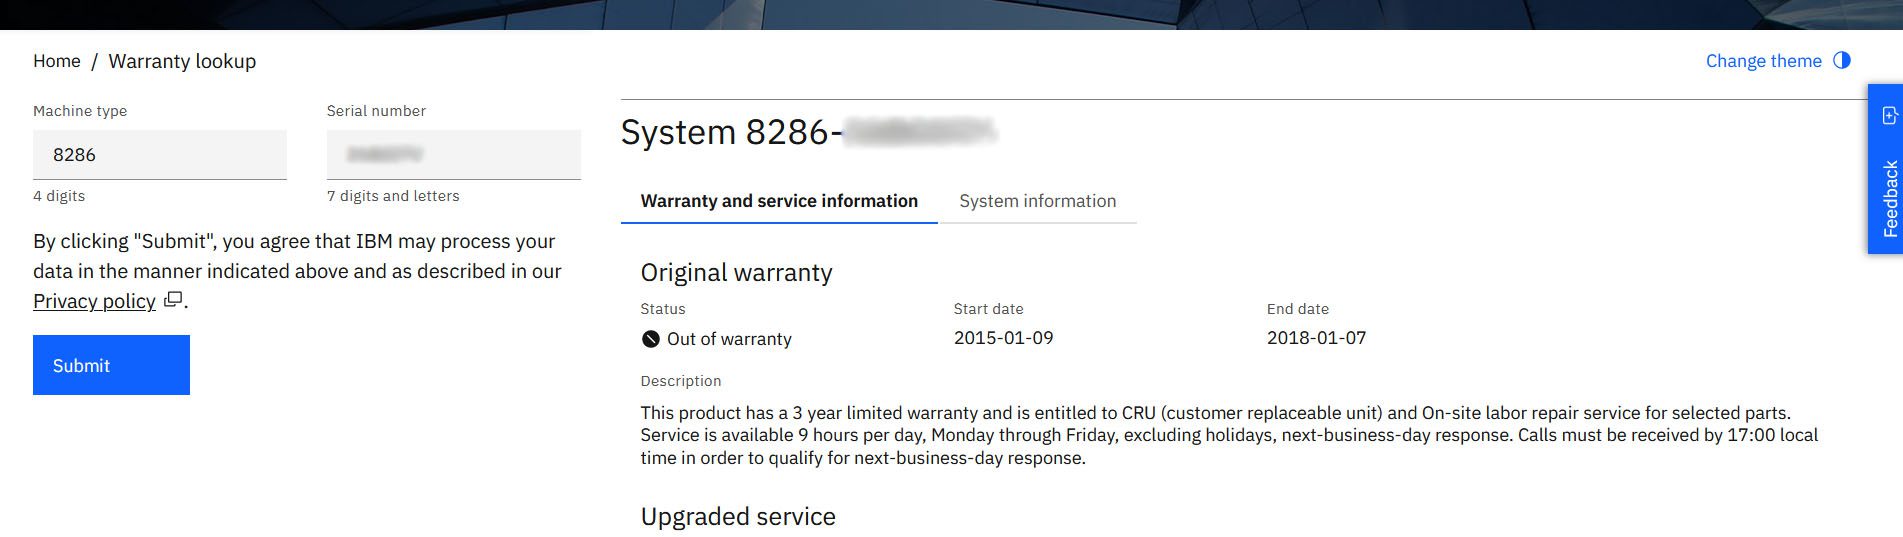 Warranty details showing start and end dates.